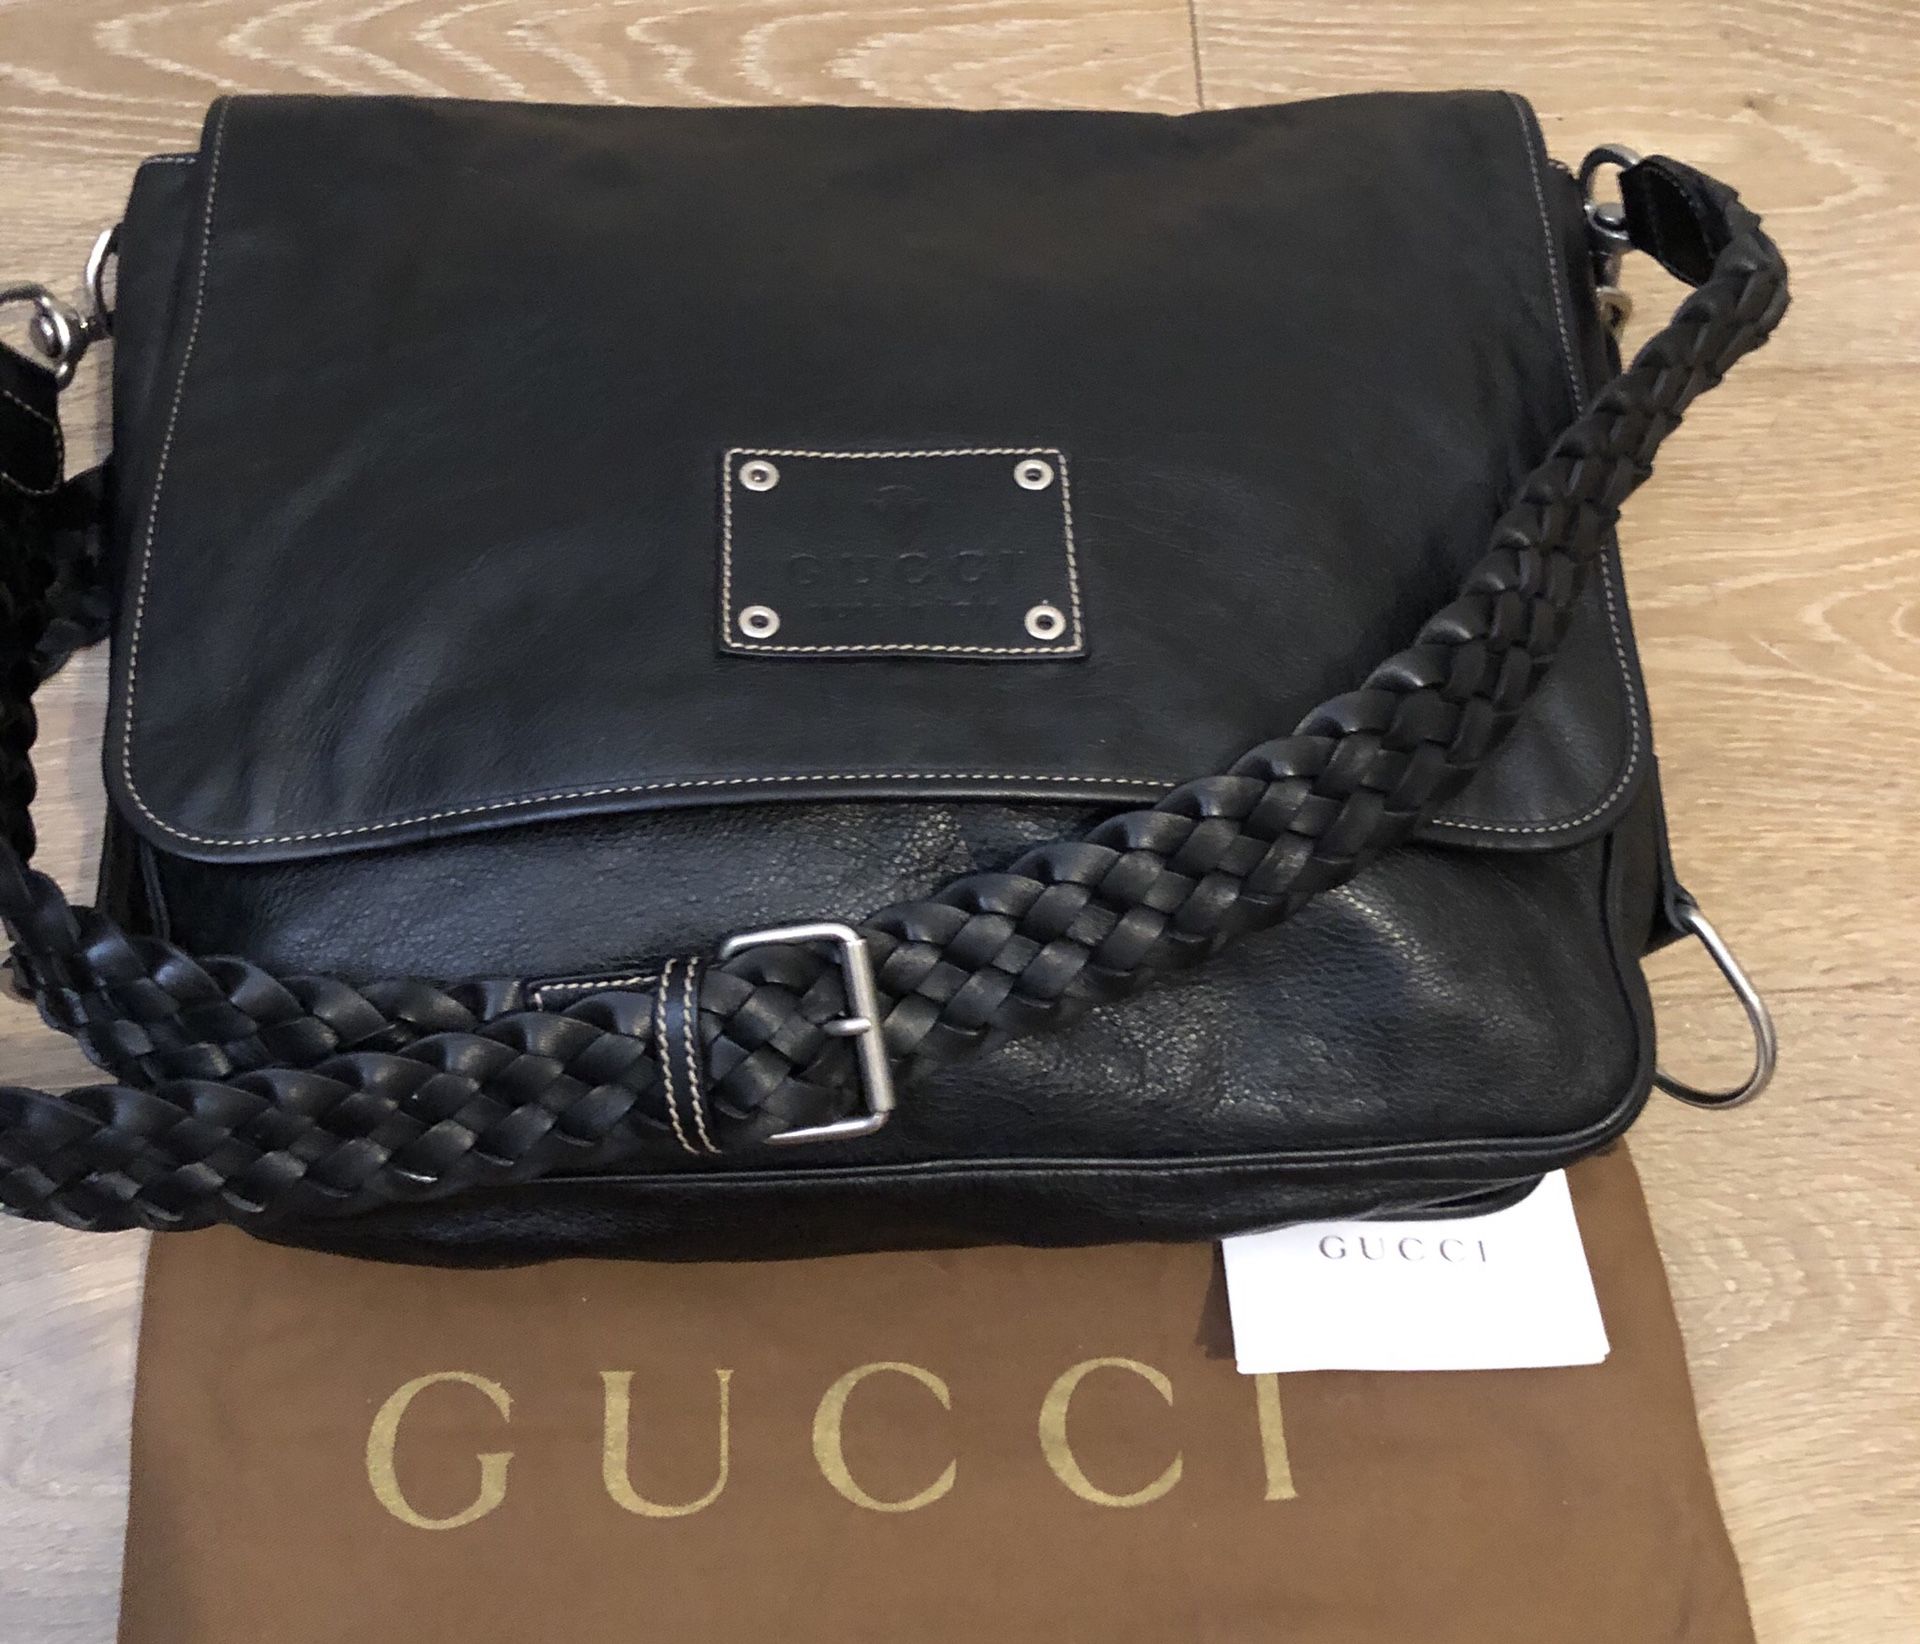 Gucci leather work bag great condition